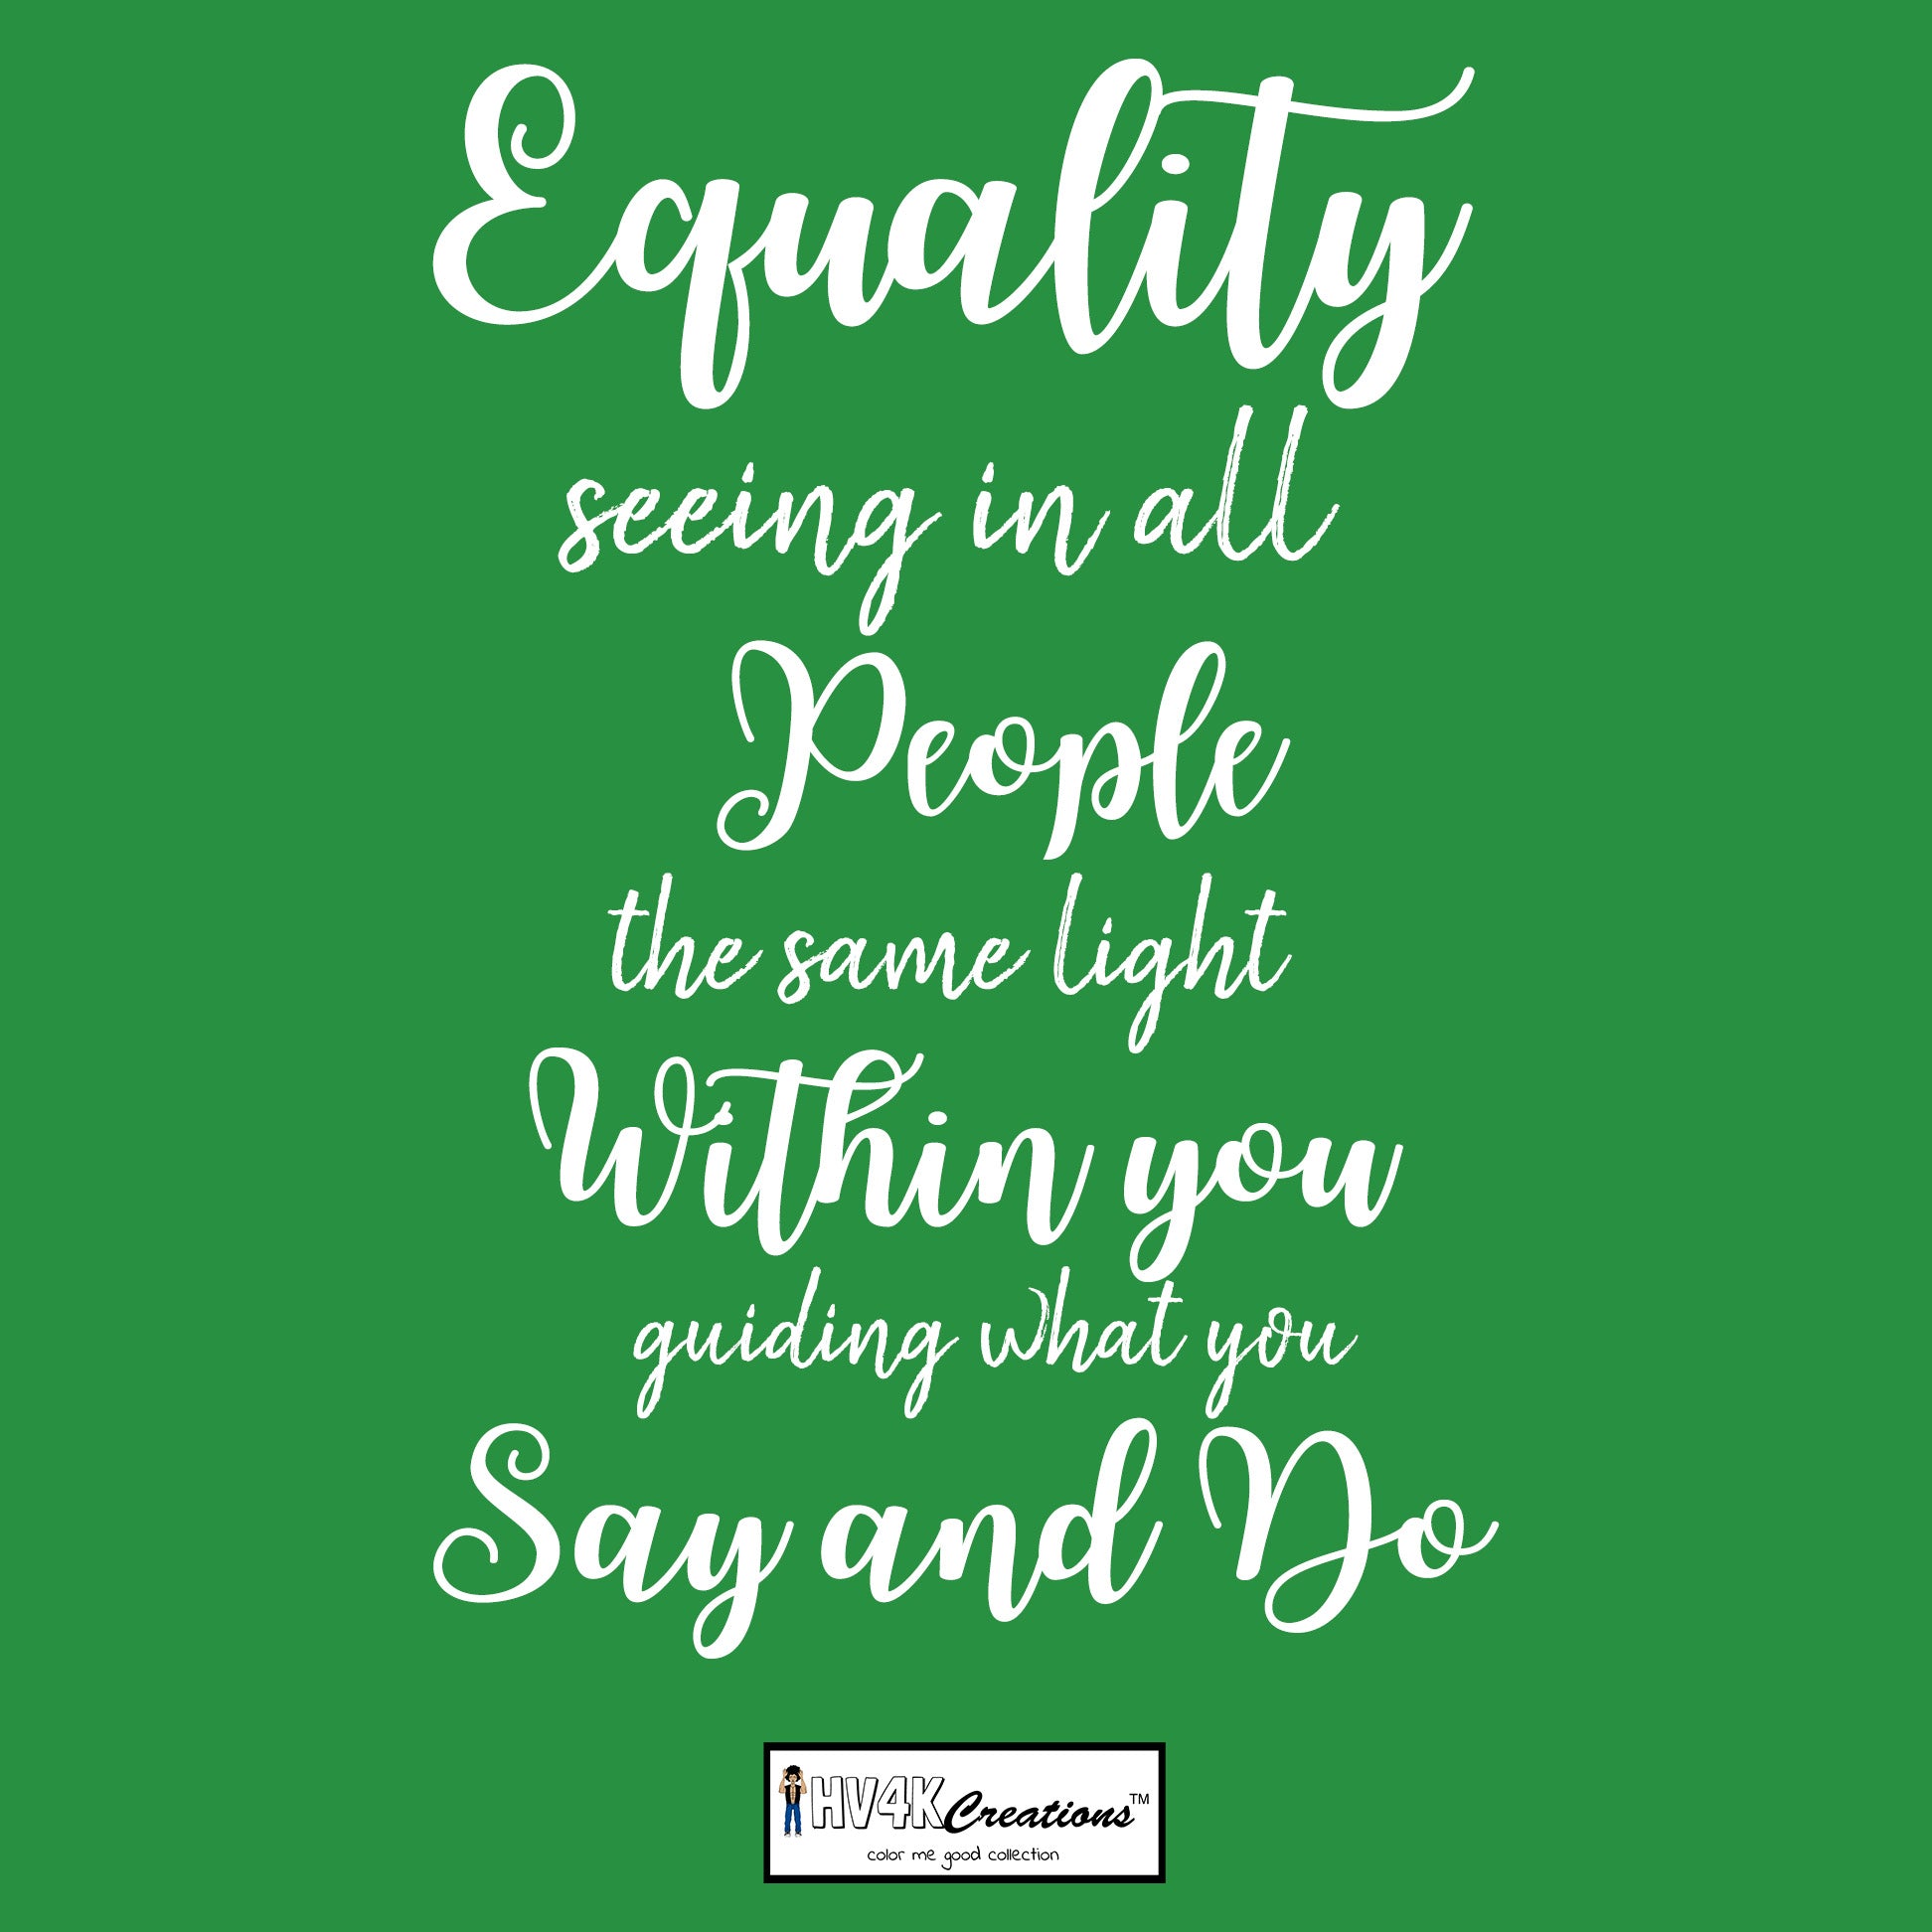 equality rhyme picture